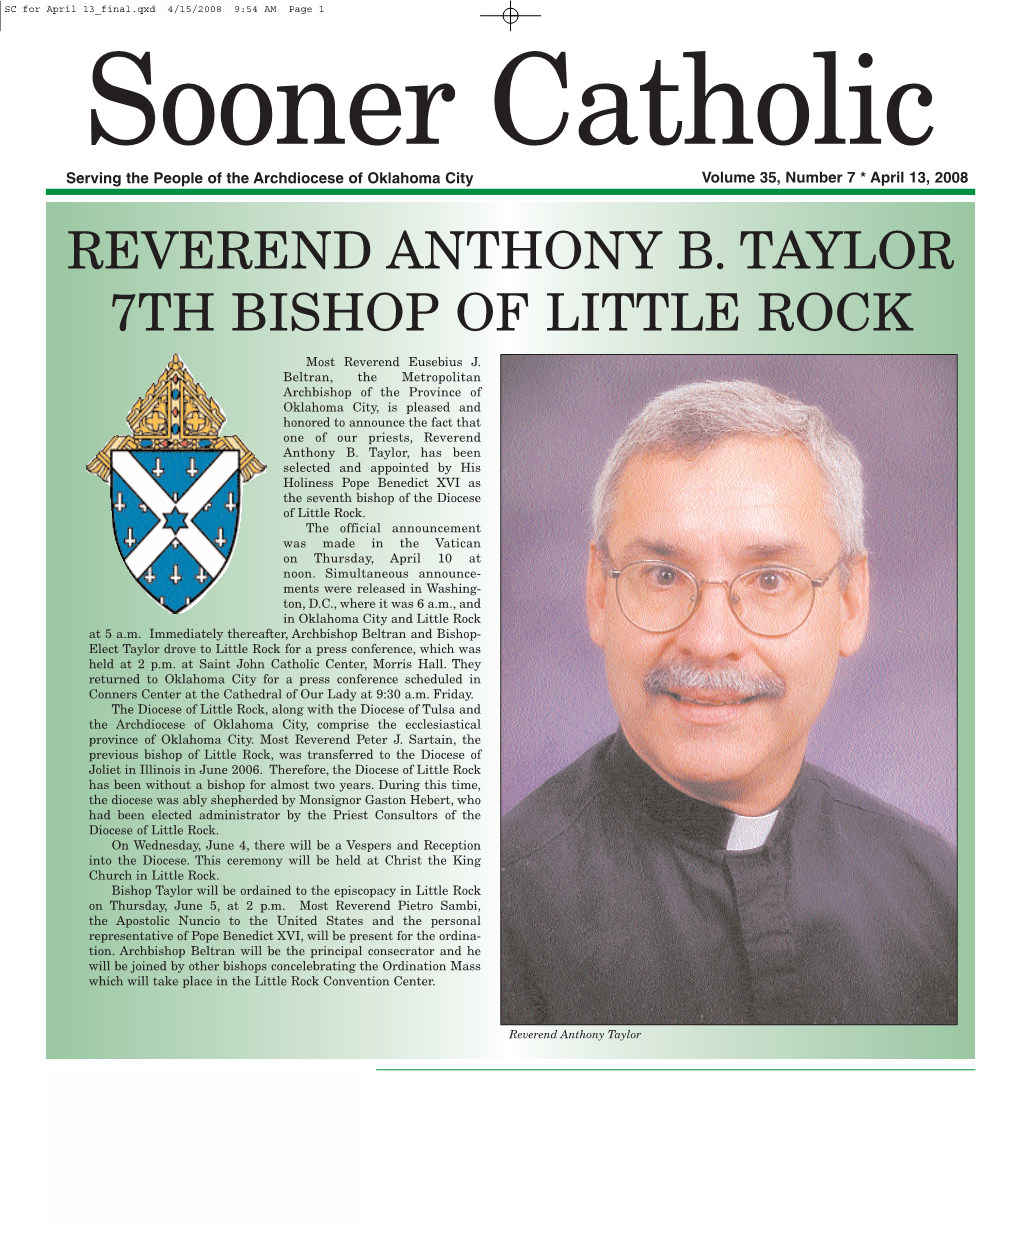 Sooner Catholic Serving the People of the Archdiocese of Oklahoma City Volume 35, Number 7 * April 13, 2008 REVEREND ANTHONY B